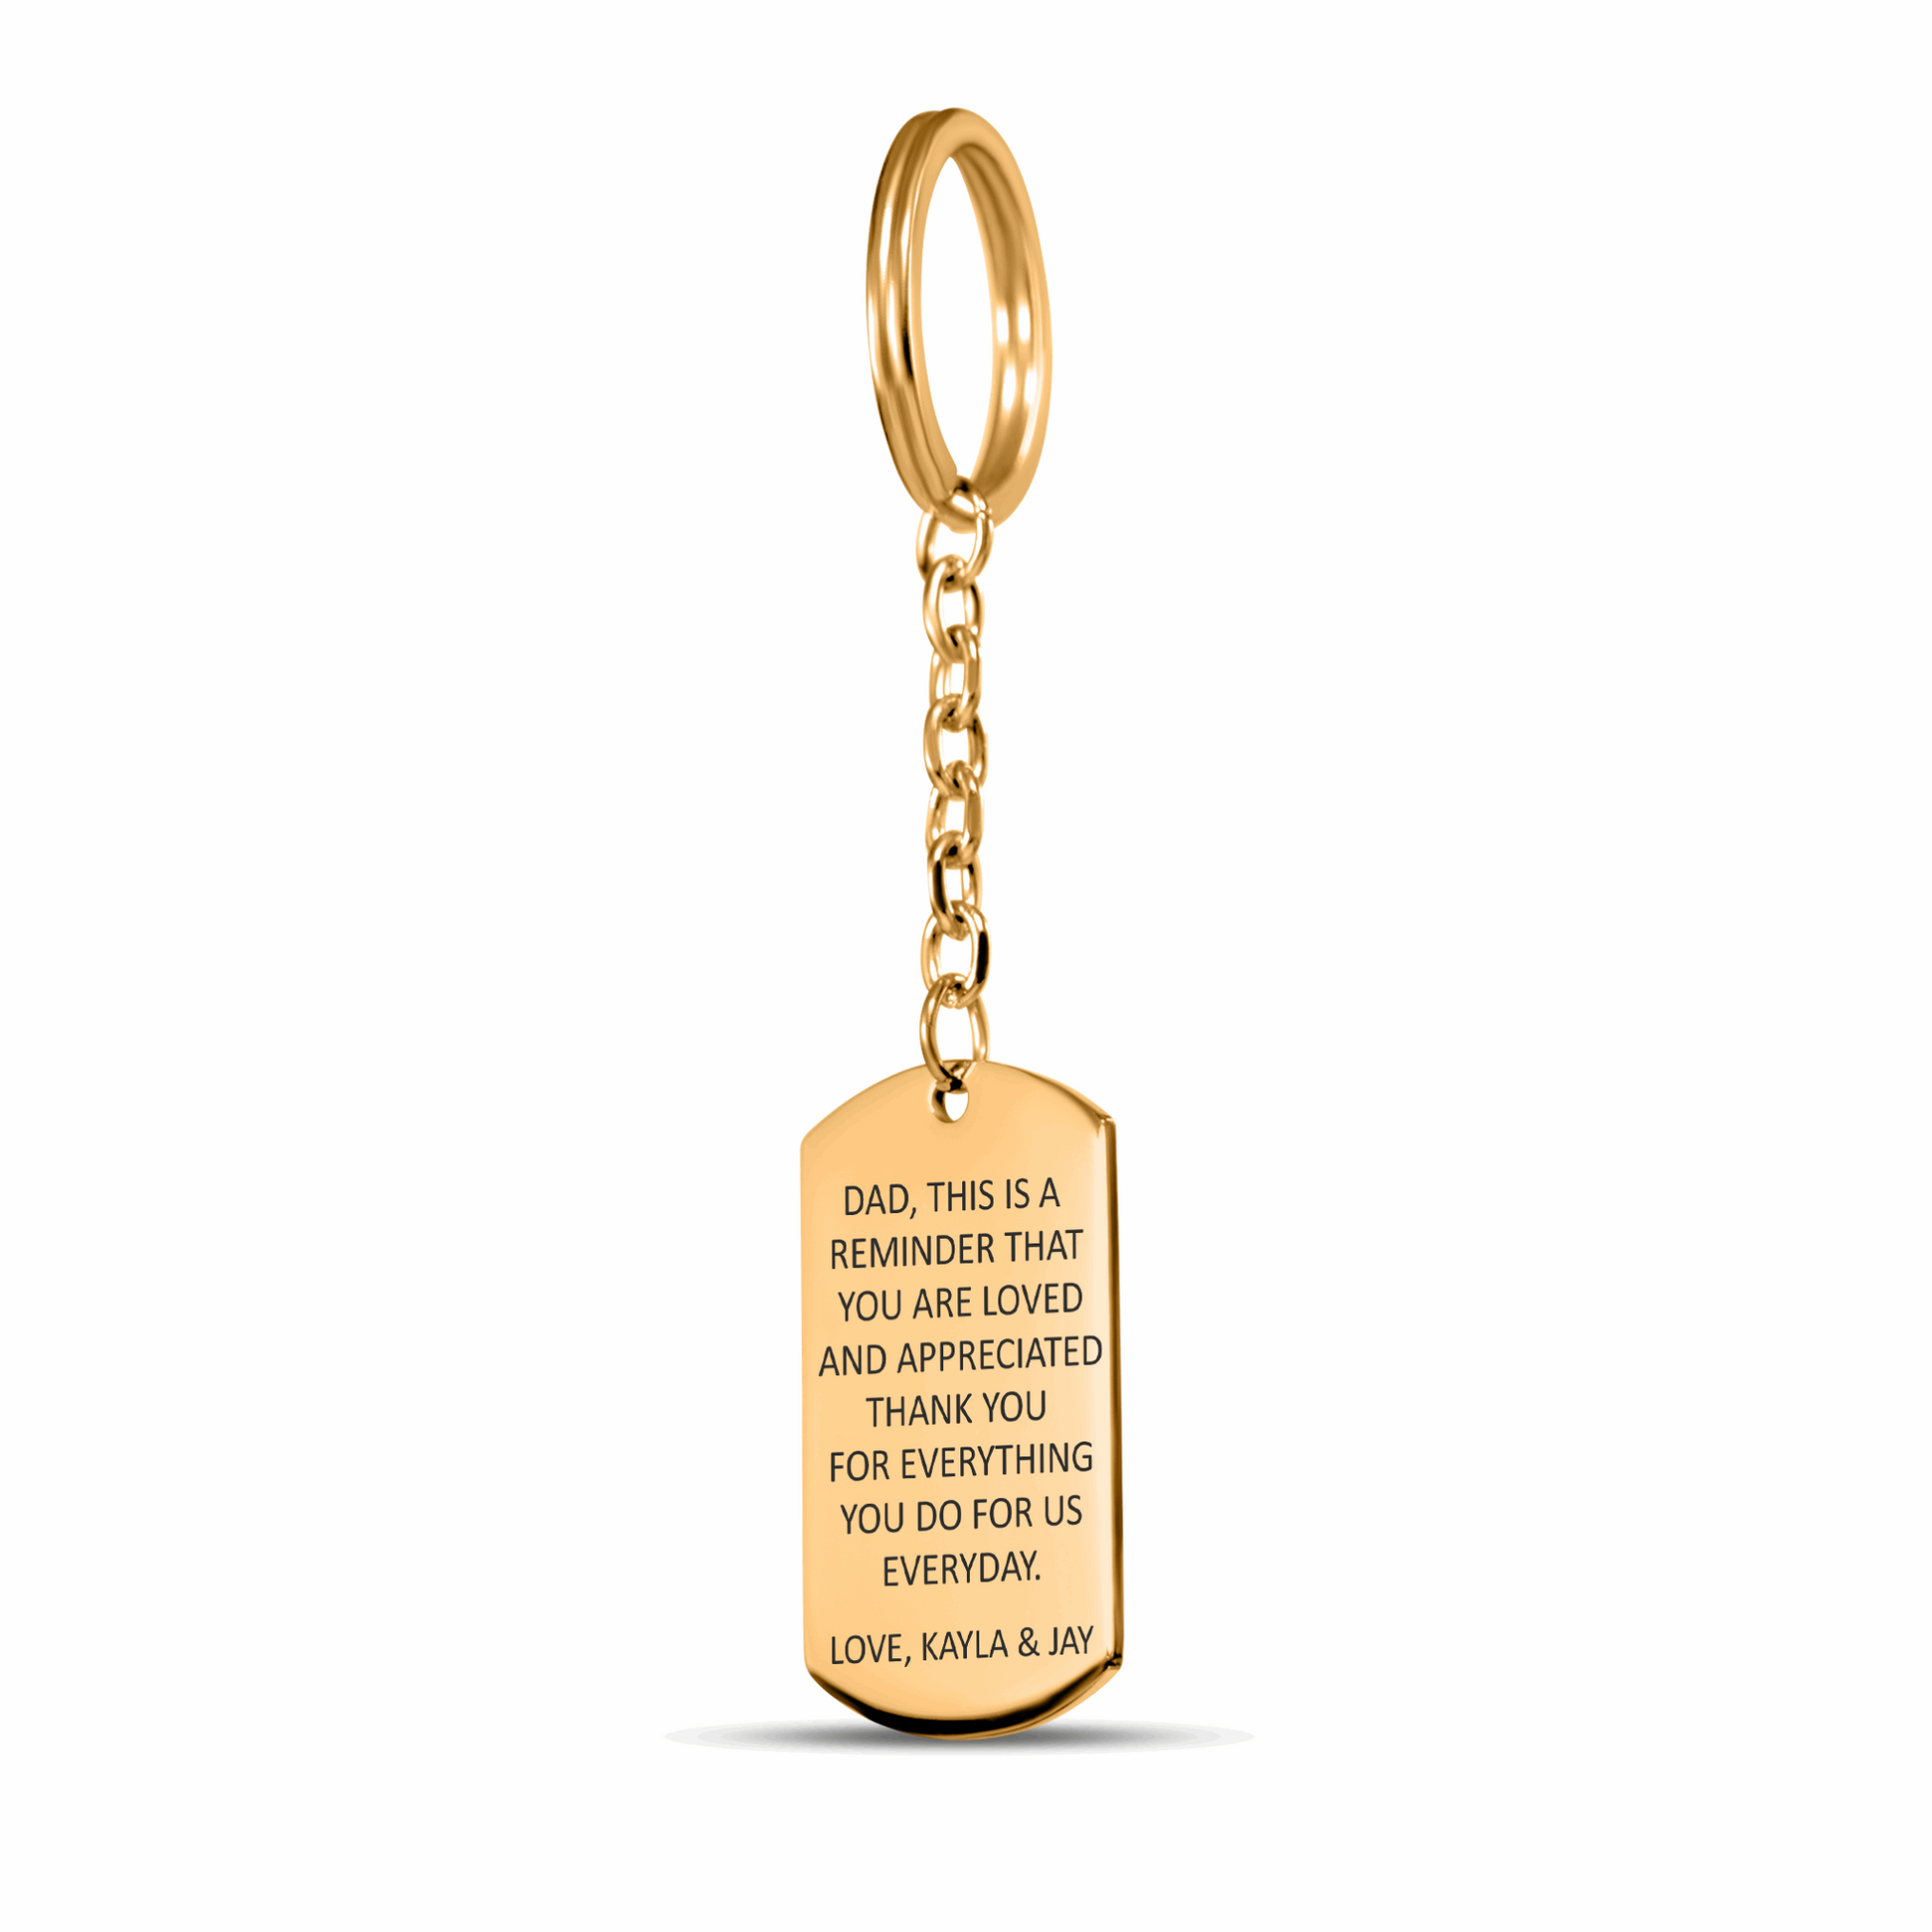 Personalized Keyrings - Custom Message For Dad Personalized Keyring 